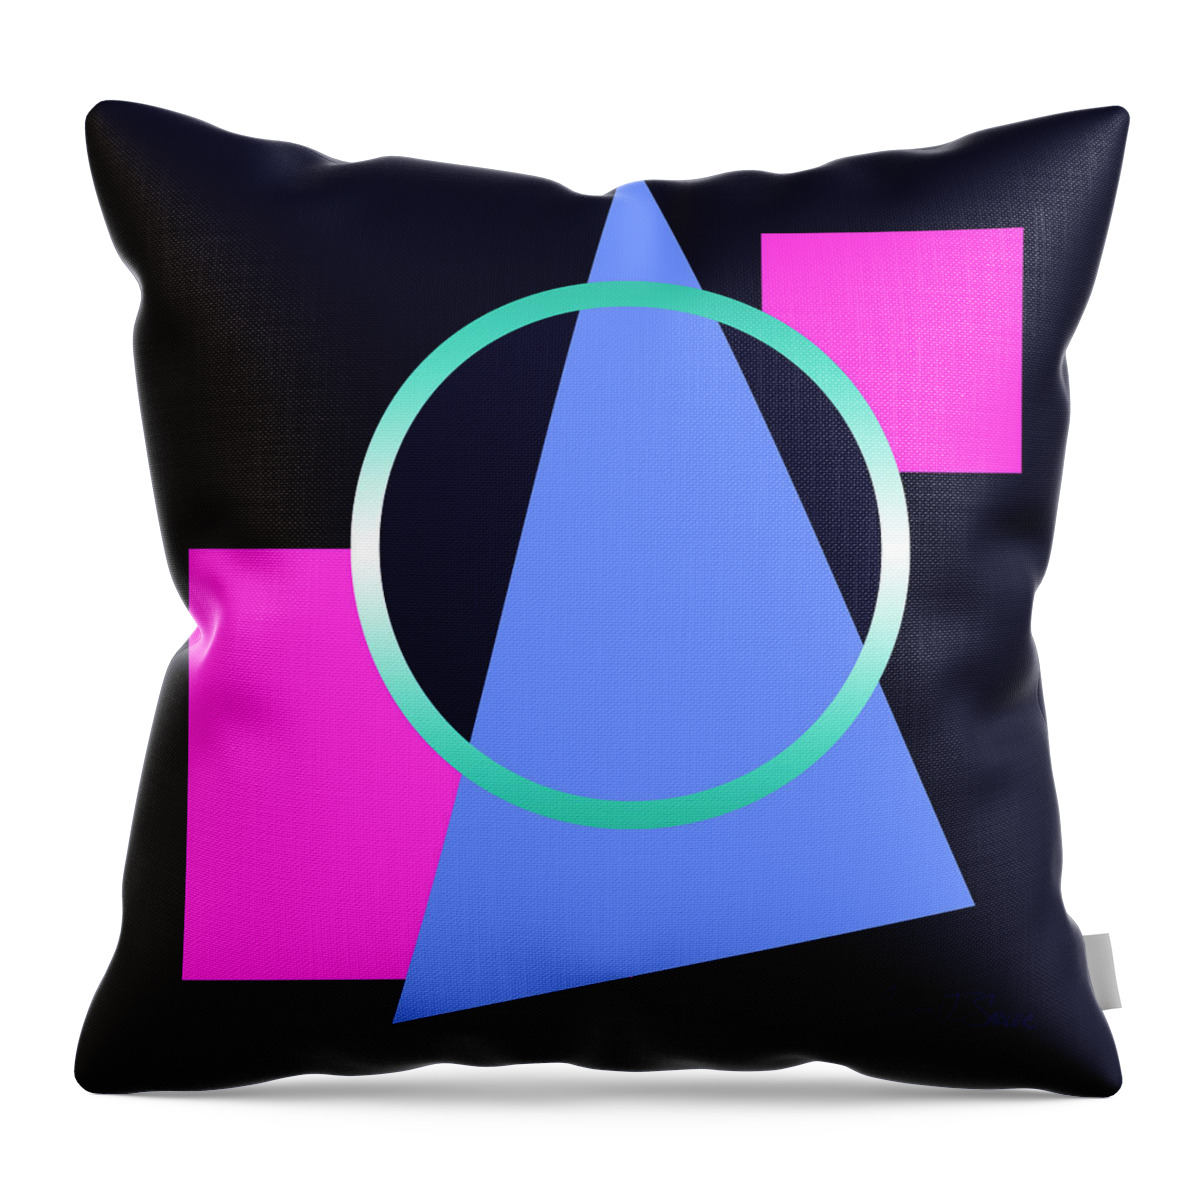  Throw Pillow featuring the digital art Squares Subsumed by Cirle by Robert J Sadler